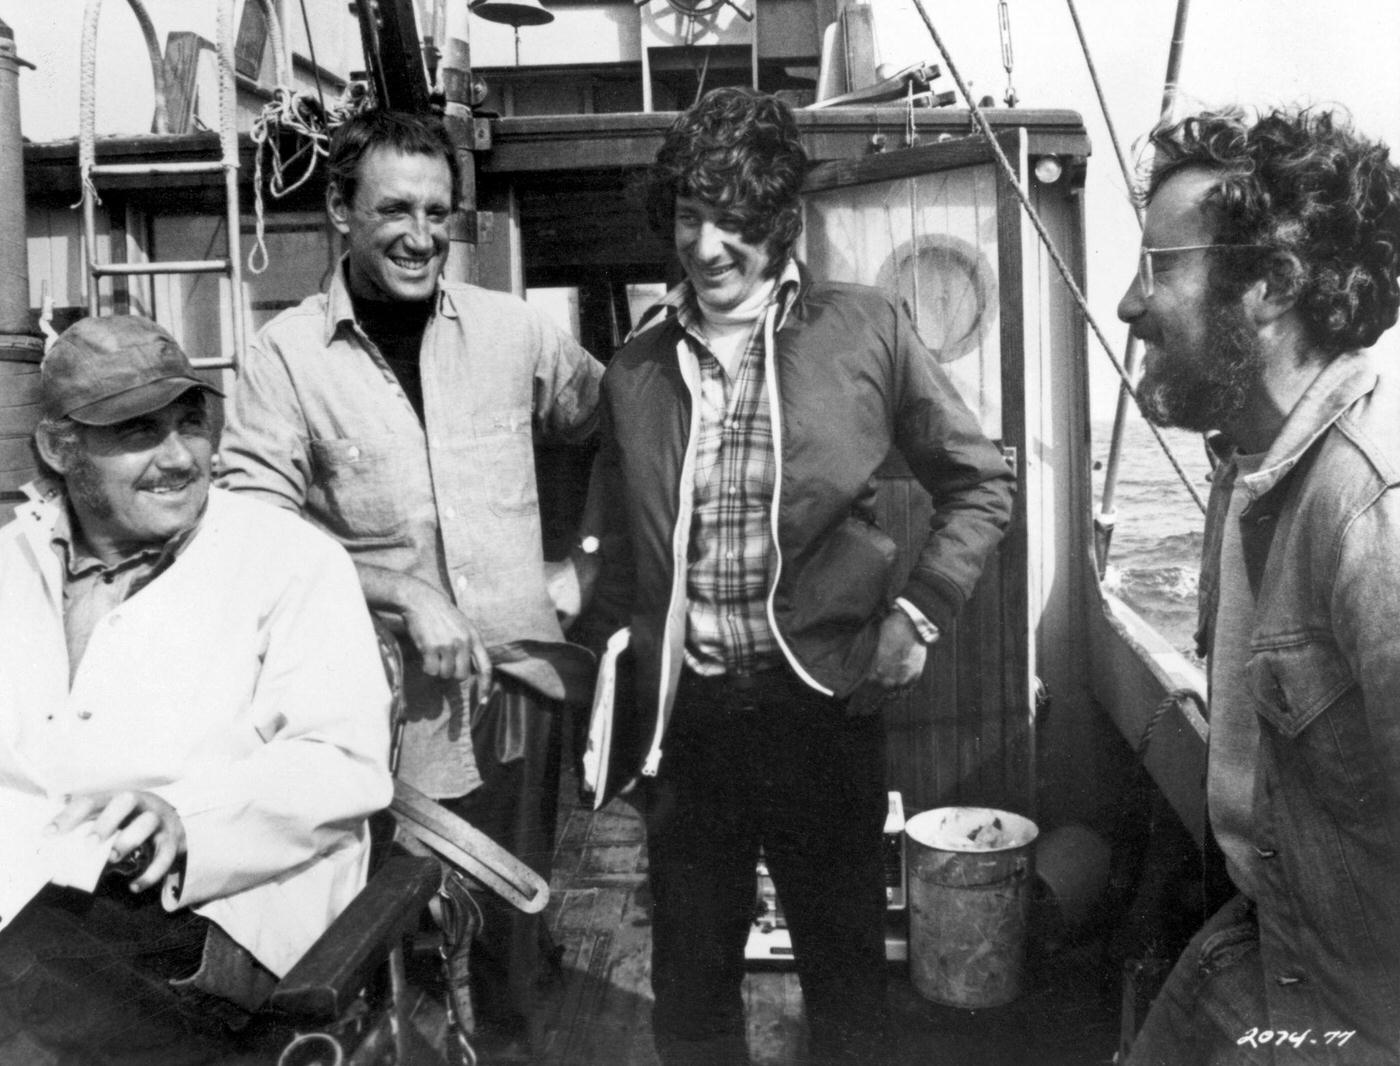 British actor Robert Shaw, American actor Roy Scheider, American director Steven Spielberg, and American actor Richard Dreyfuss laugh together on a boat during the filming of Spielberg's 'Jaws', 1975